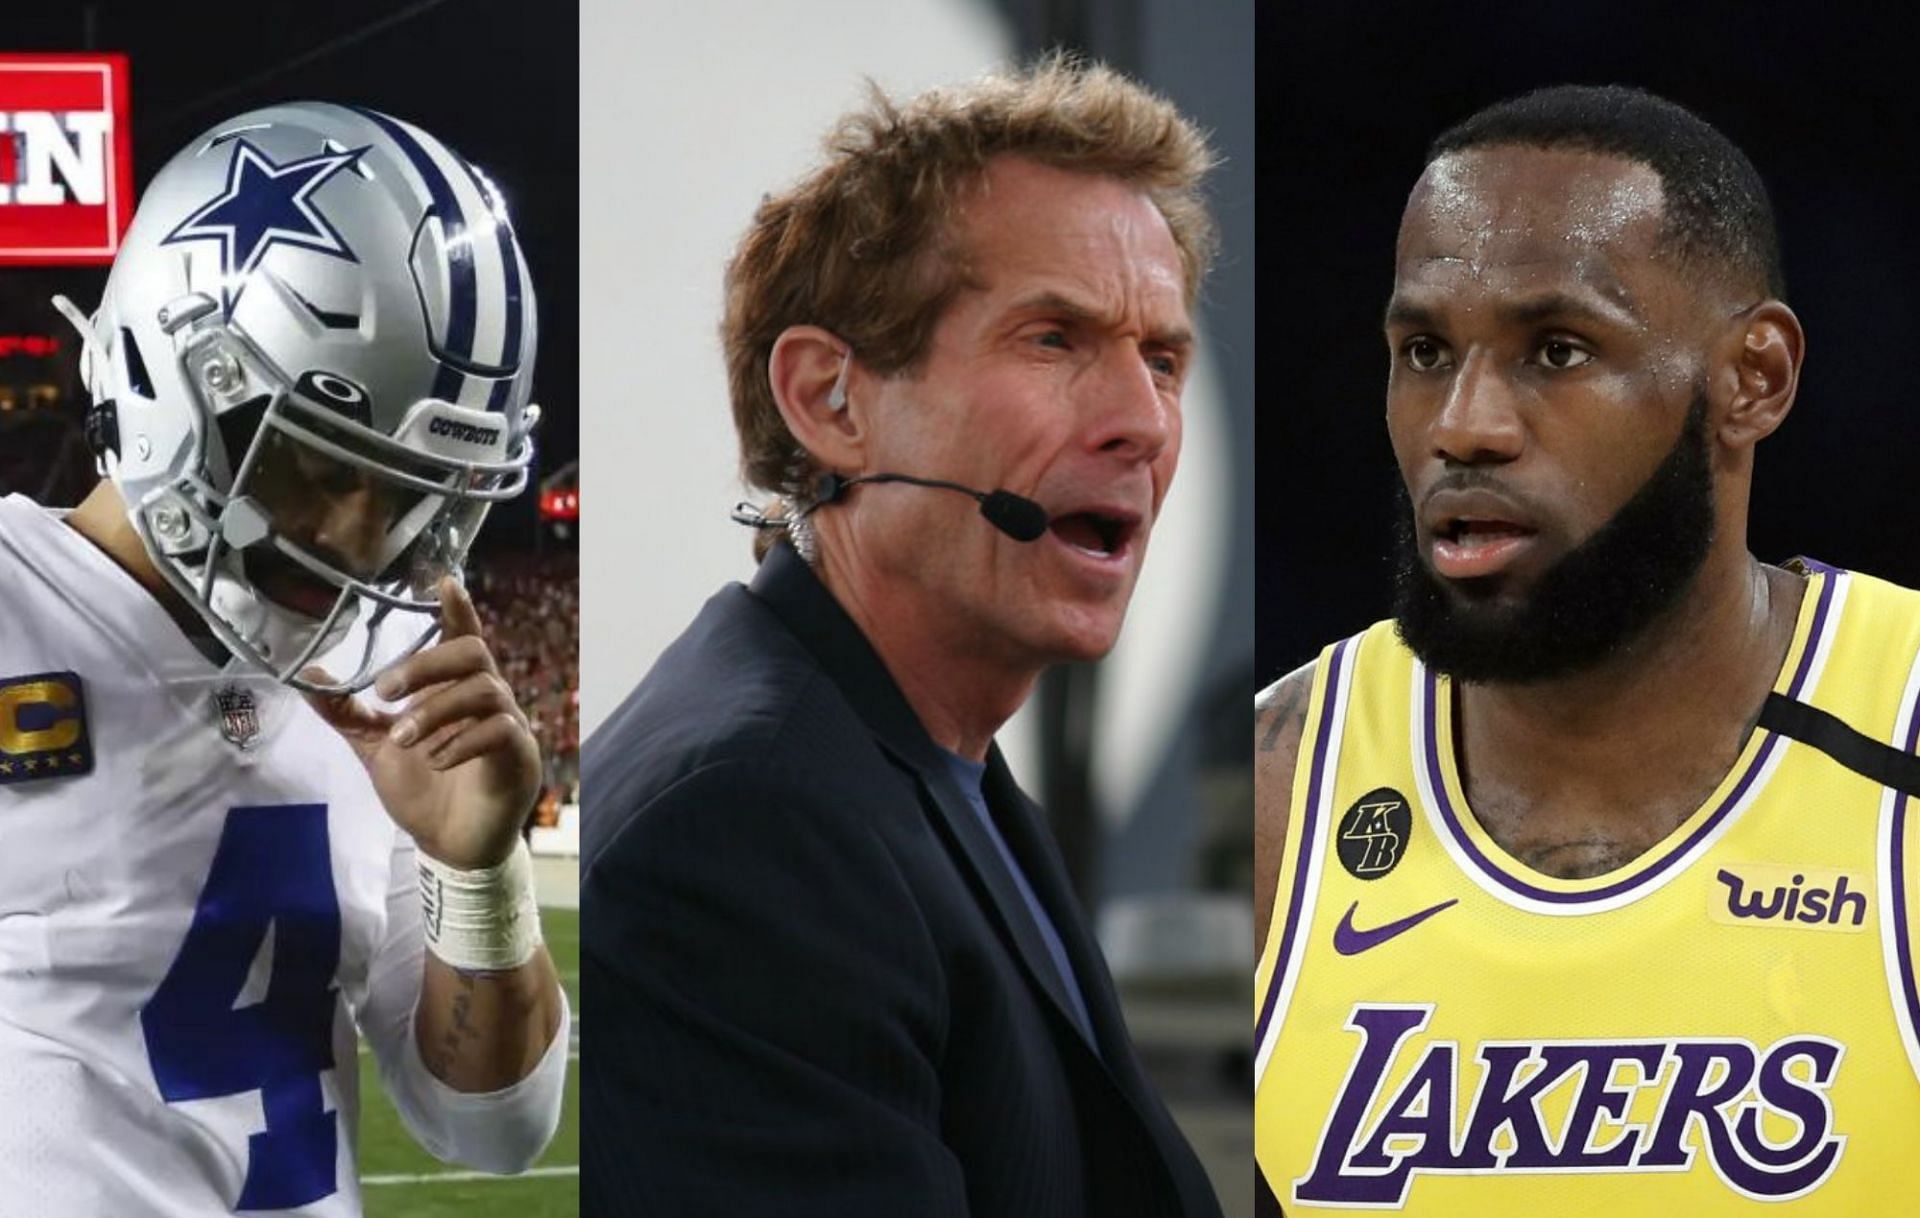 Skip Bayless compares LeBron James and the LA Lakers to the Dallas Cowboys